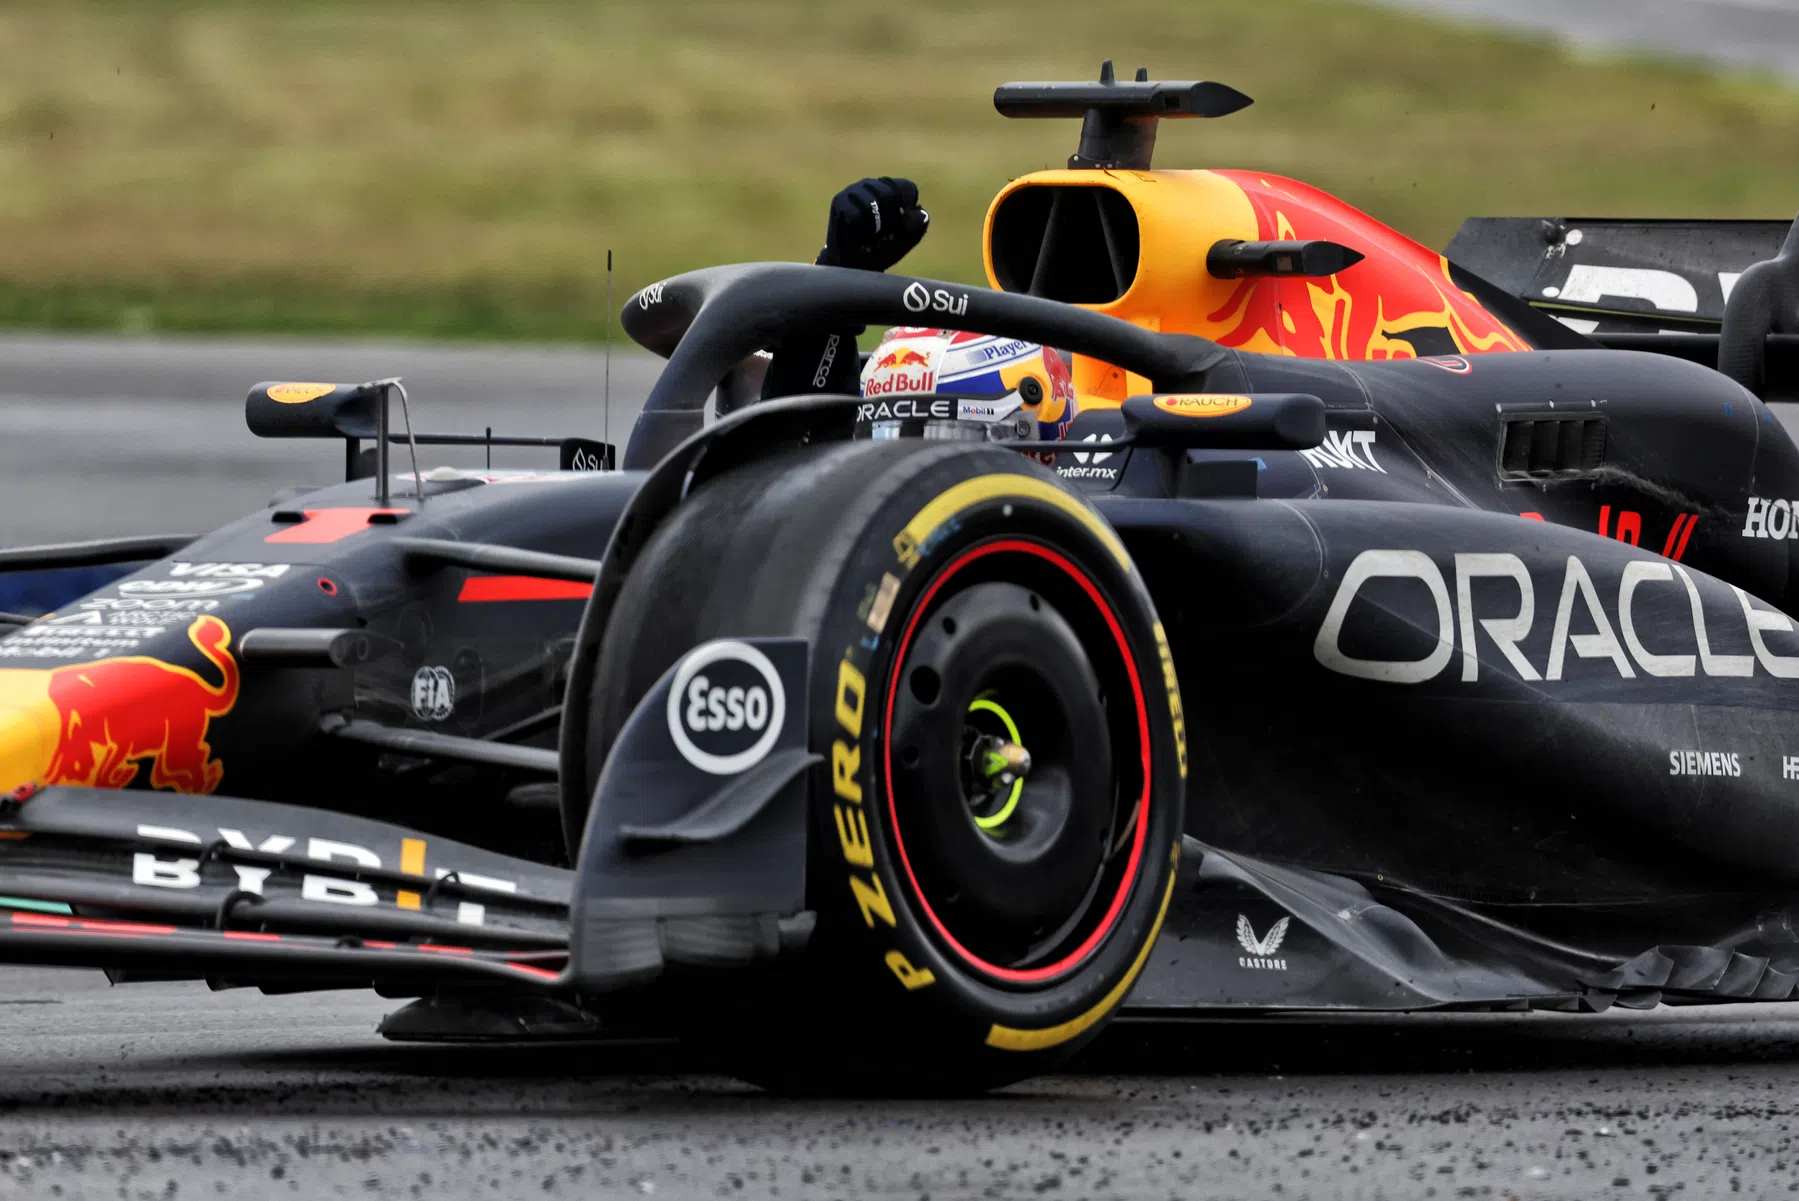 verstappen and red bull did secret test at imola last week